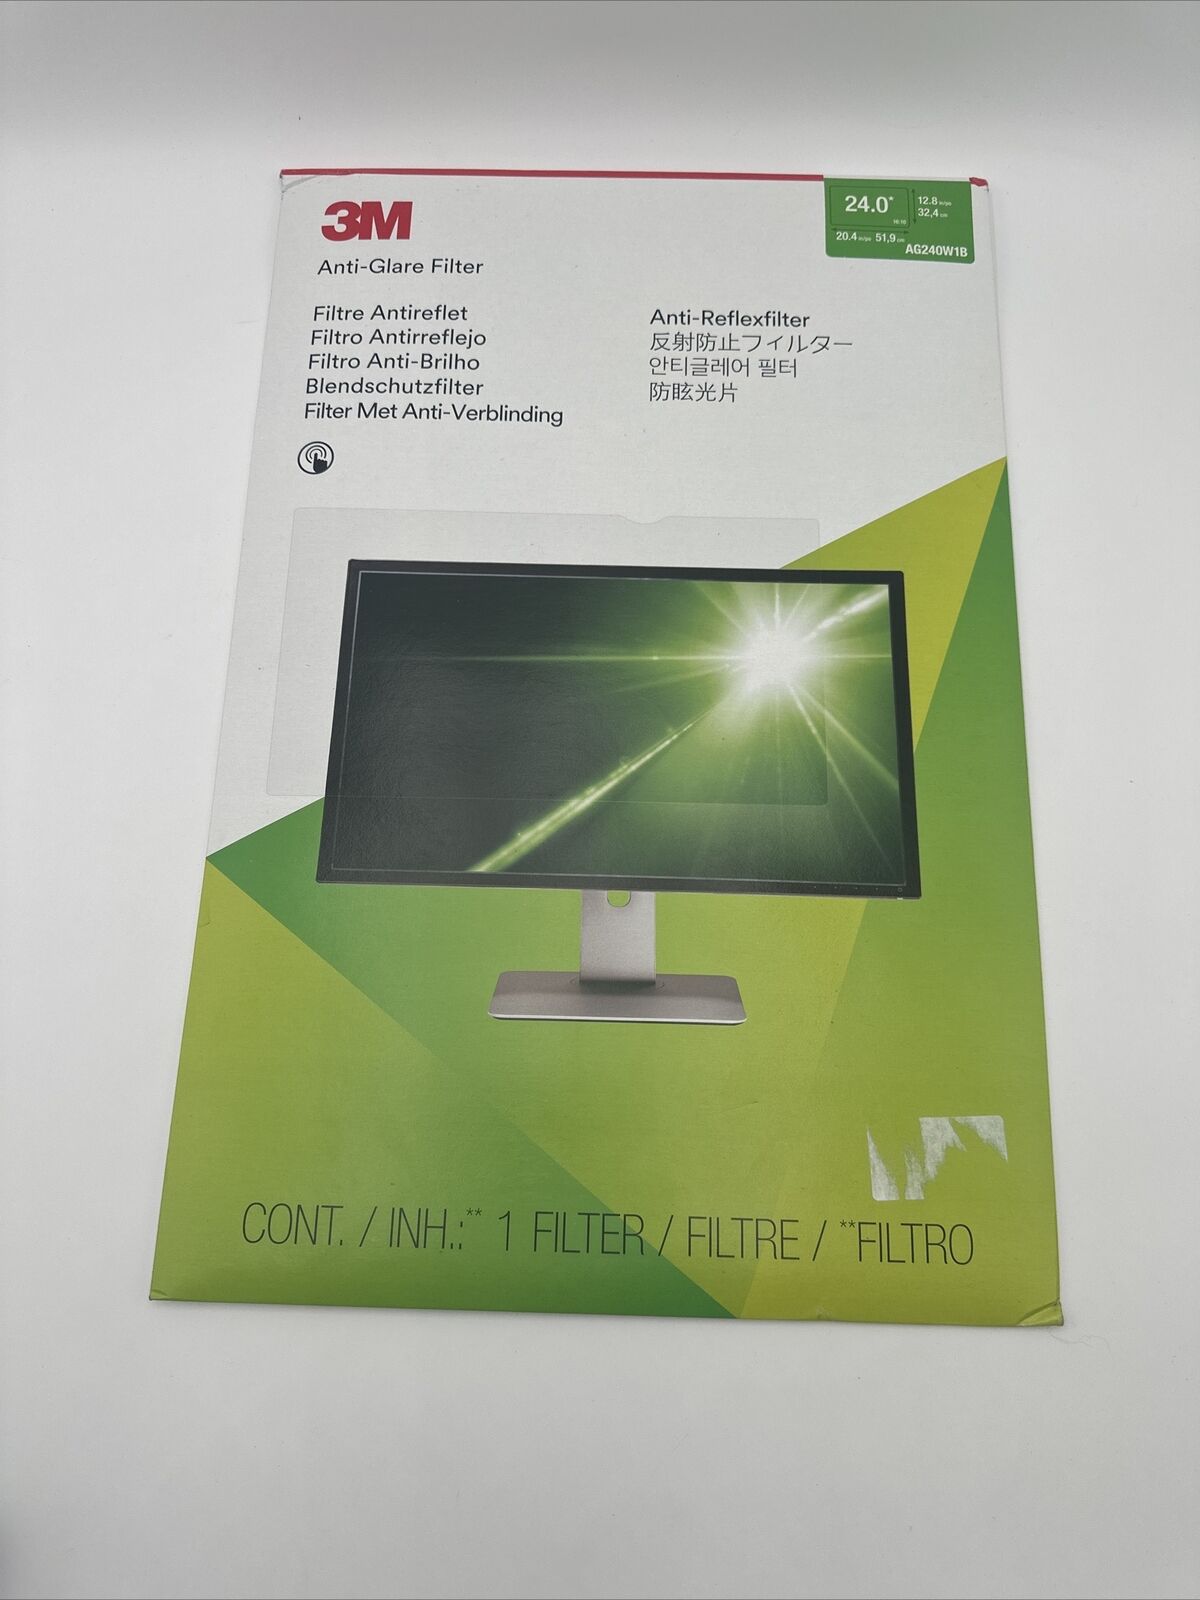 3M AG240W1B Anti-Glare Filter for 24.0